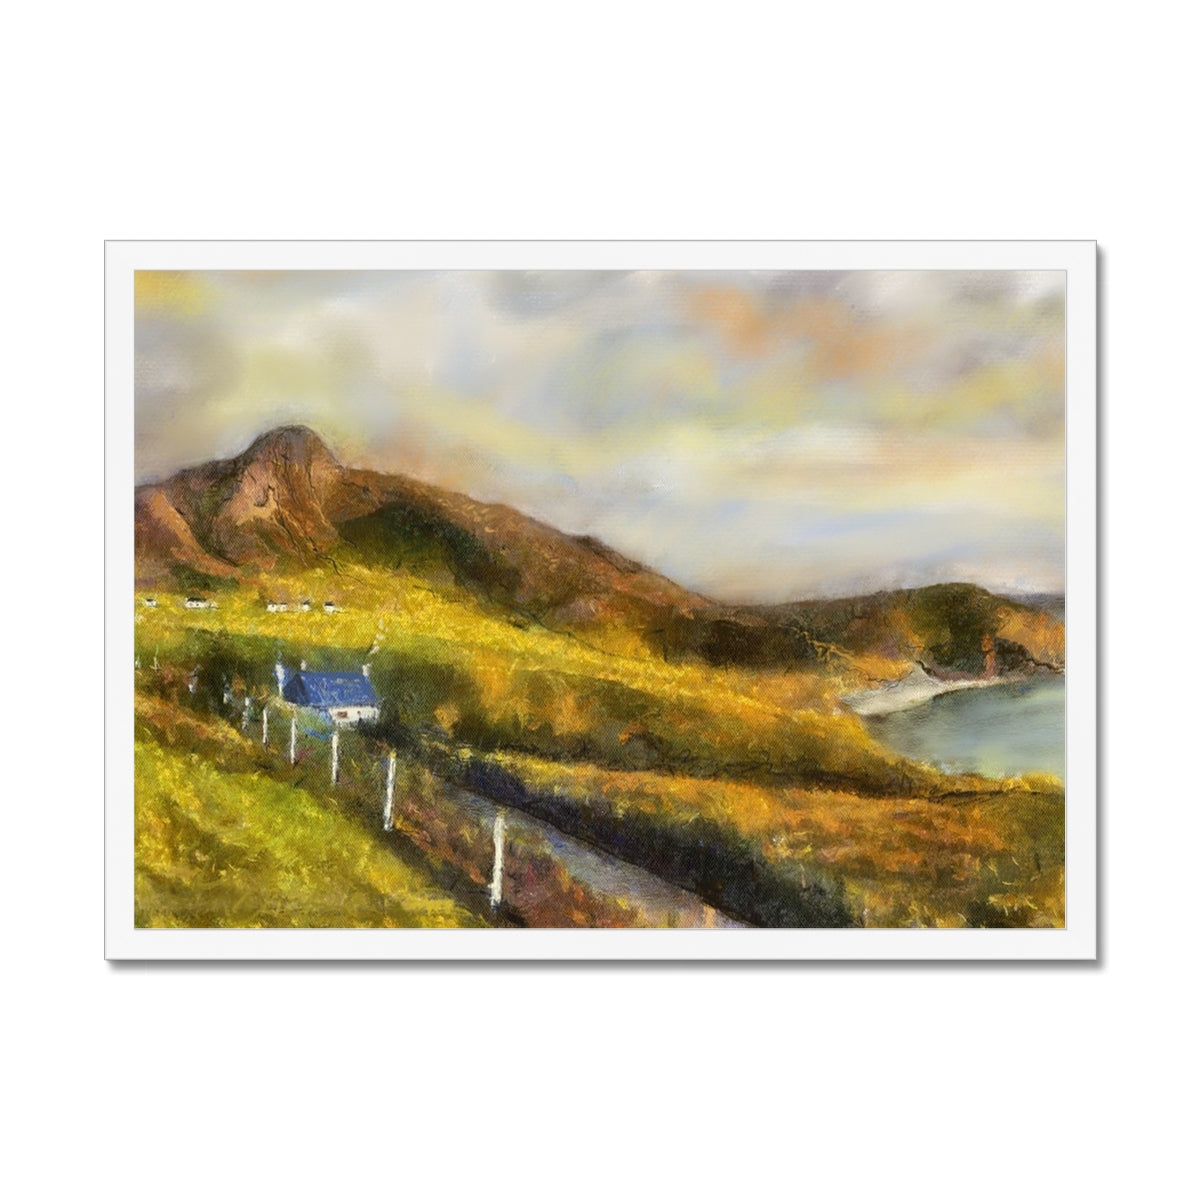 Coldbackie Painting | Framed Prints From Scotland-Framed Prints-Scottish Highlands & Lowlands Art Gallery-A2 Landscape-White Frame-Paintings, Prints, Homeware, Art Gifts From Scotland By Scottish Artist Kevin Hunter